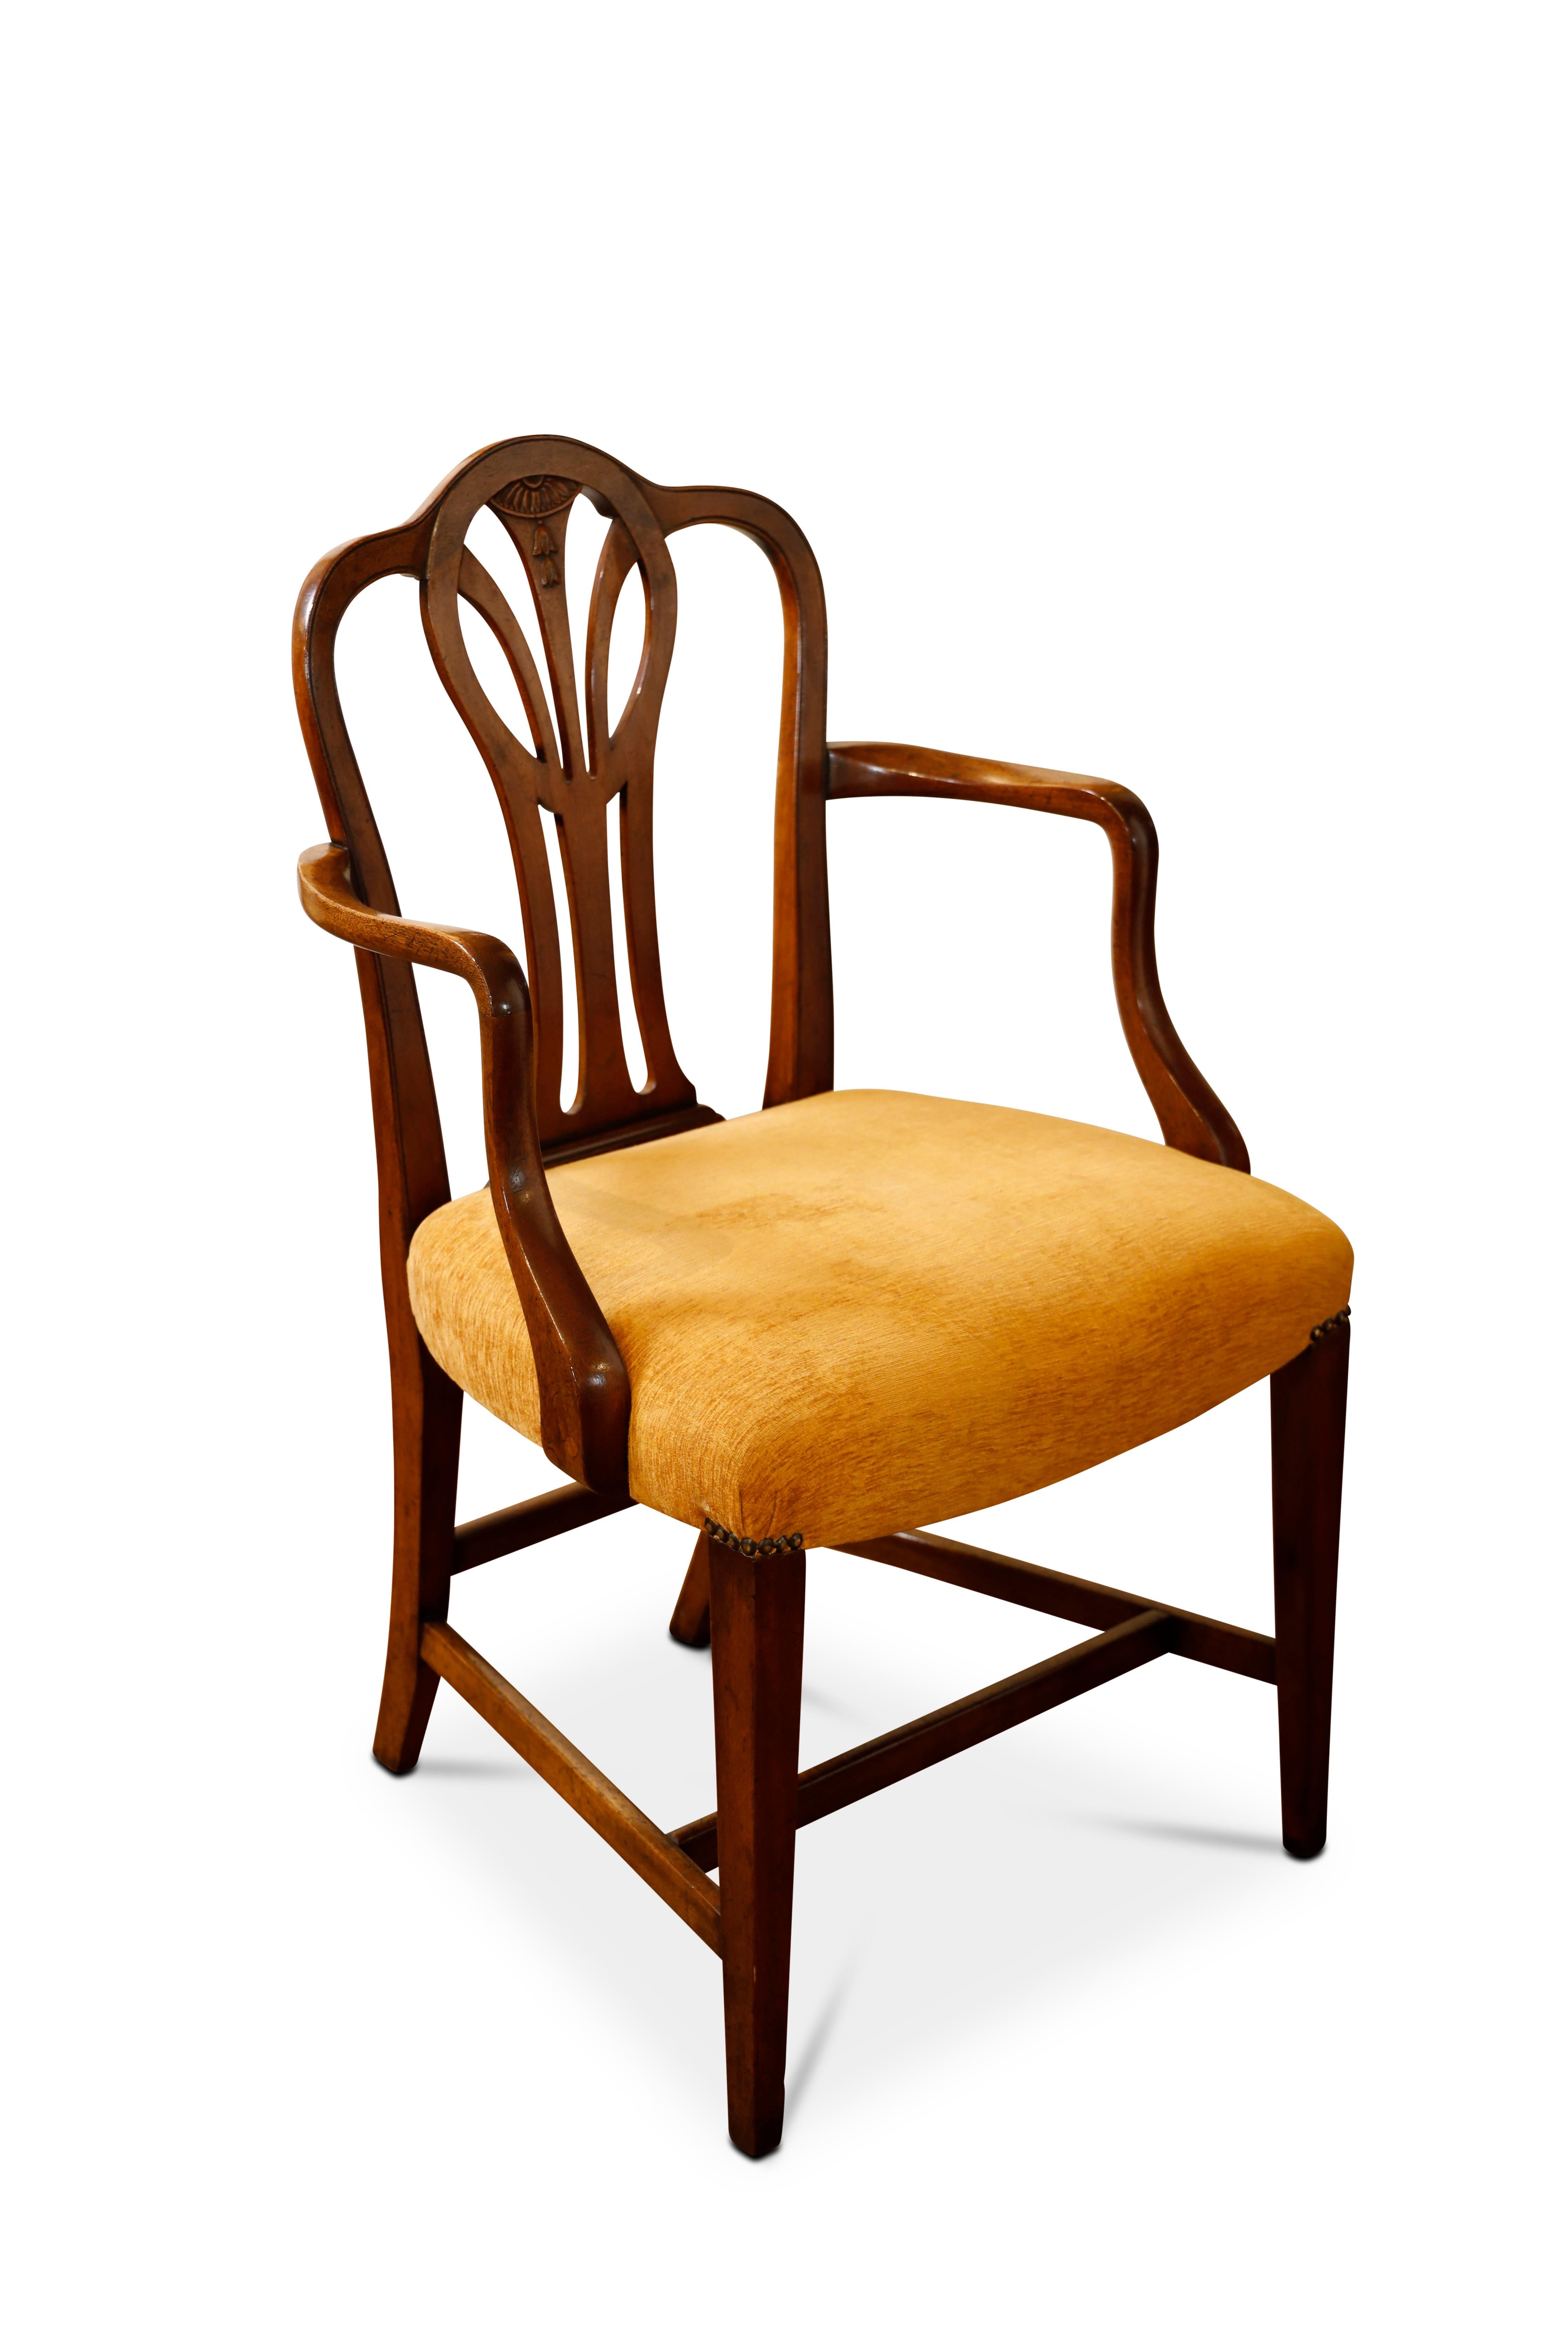 Edwardian Georgian Style Mahogany Dining Chairs In Excellent Condition For Sale In Woodbury, CT